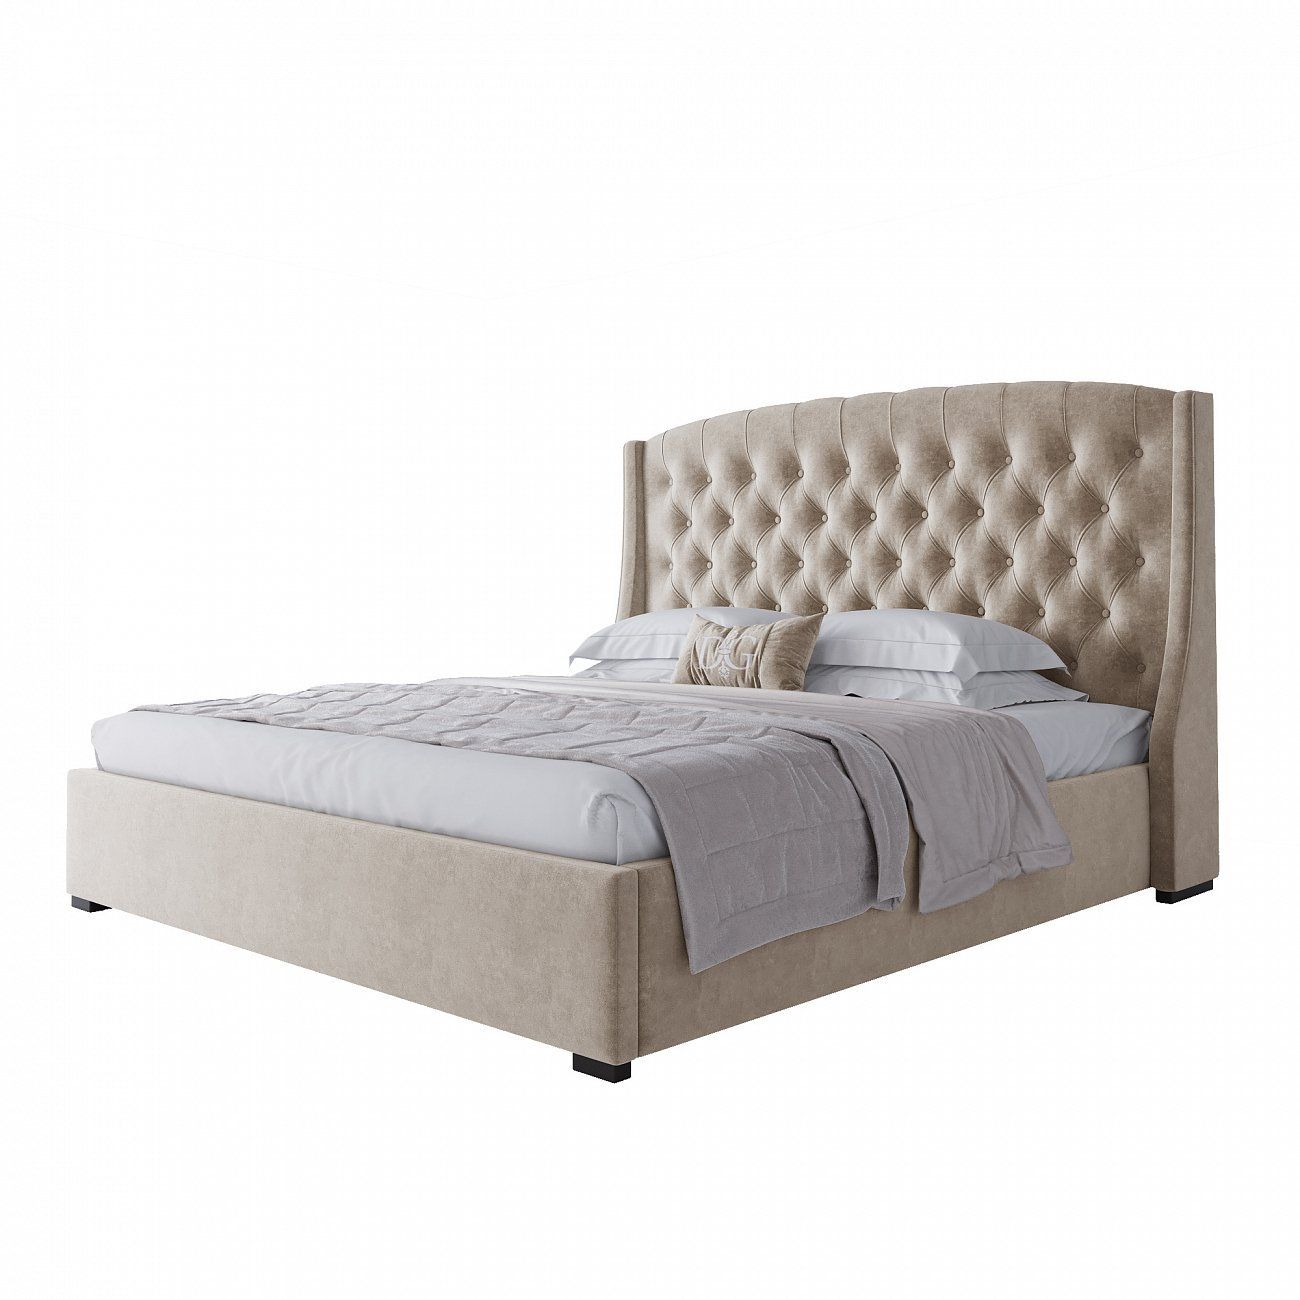 Double bed with upholstered headboard 180x200 cm light beige Hugo M R